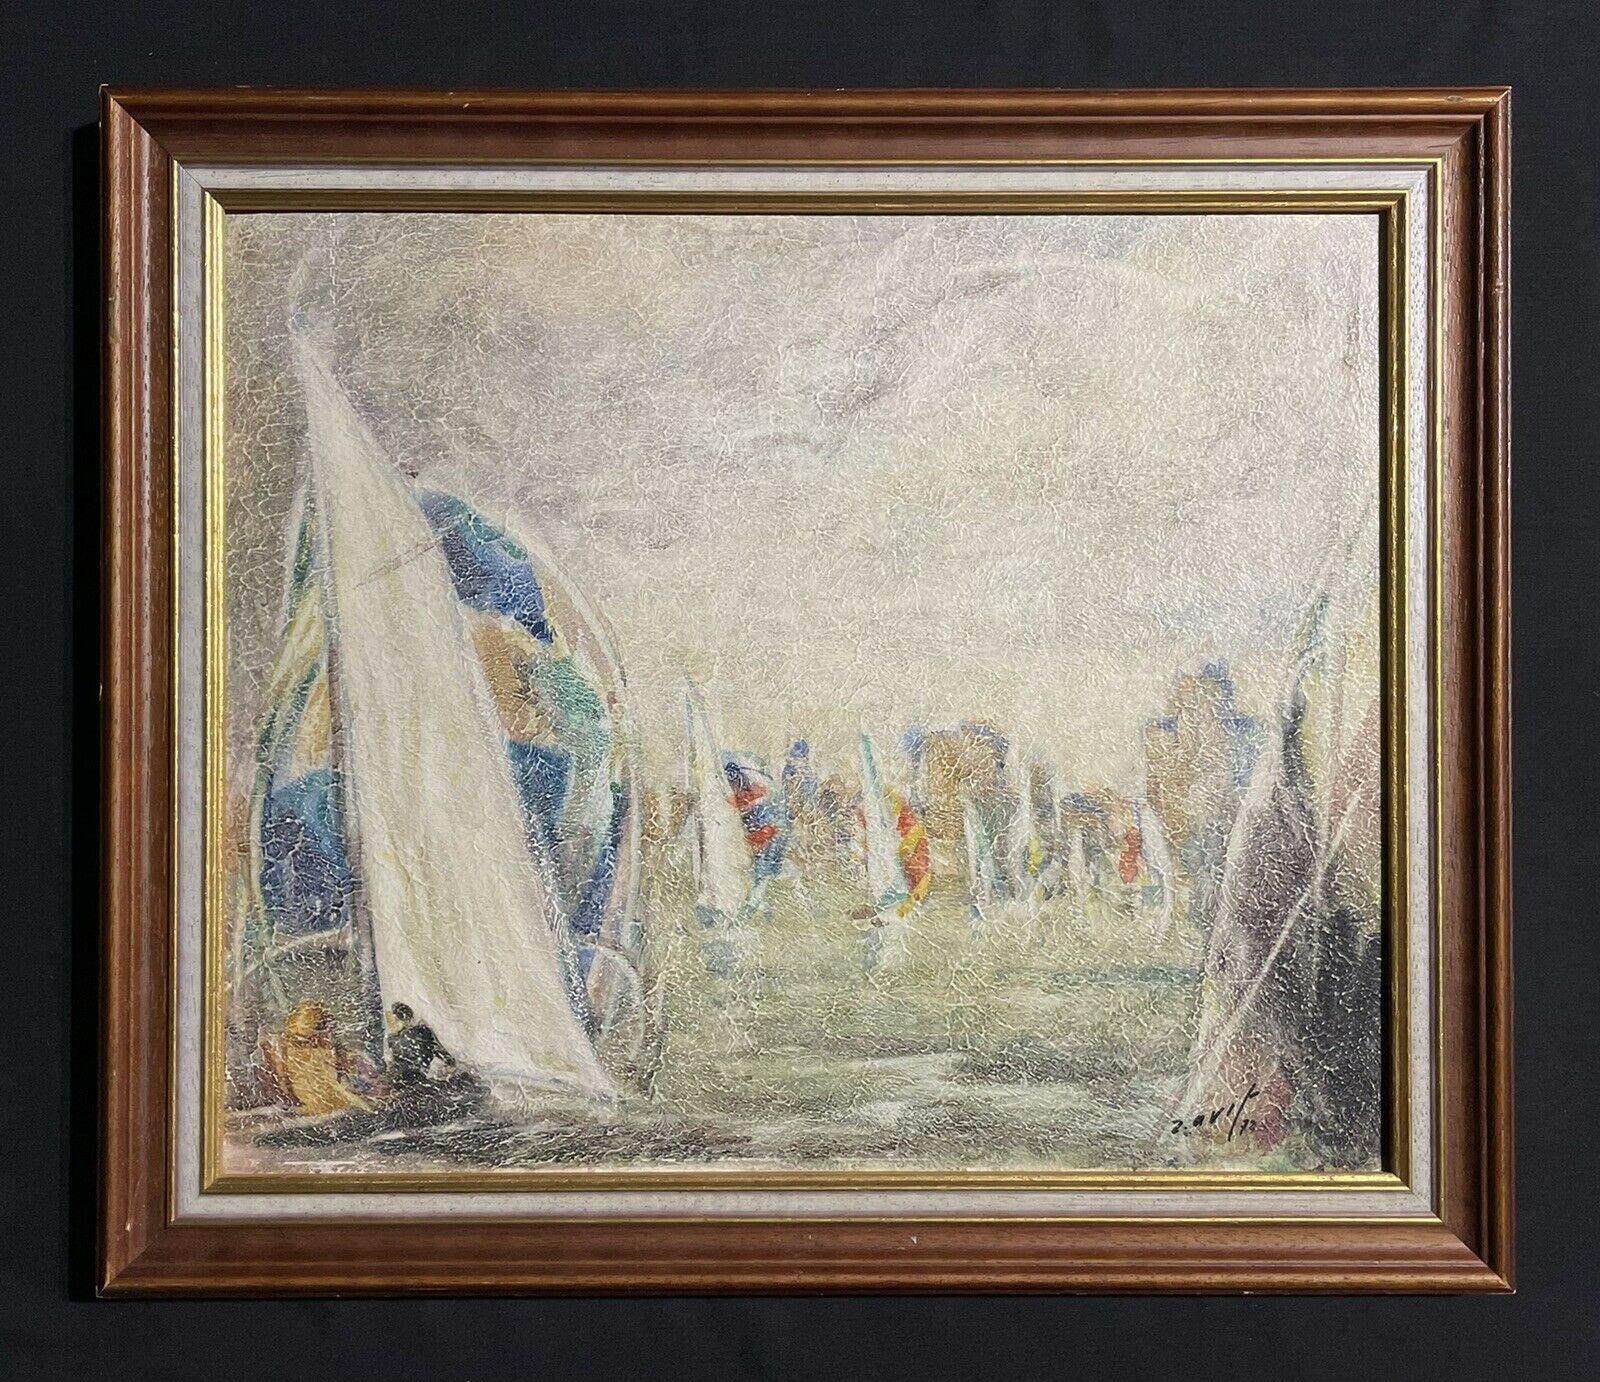 Racing Yachts Flotilla at Sea, Signed 1970's French Modernist Oil Painting - Gray Landscape Painting by Unknown